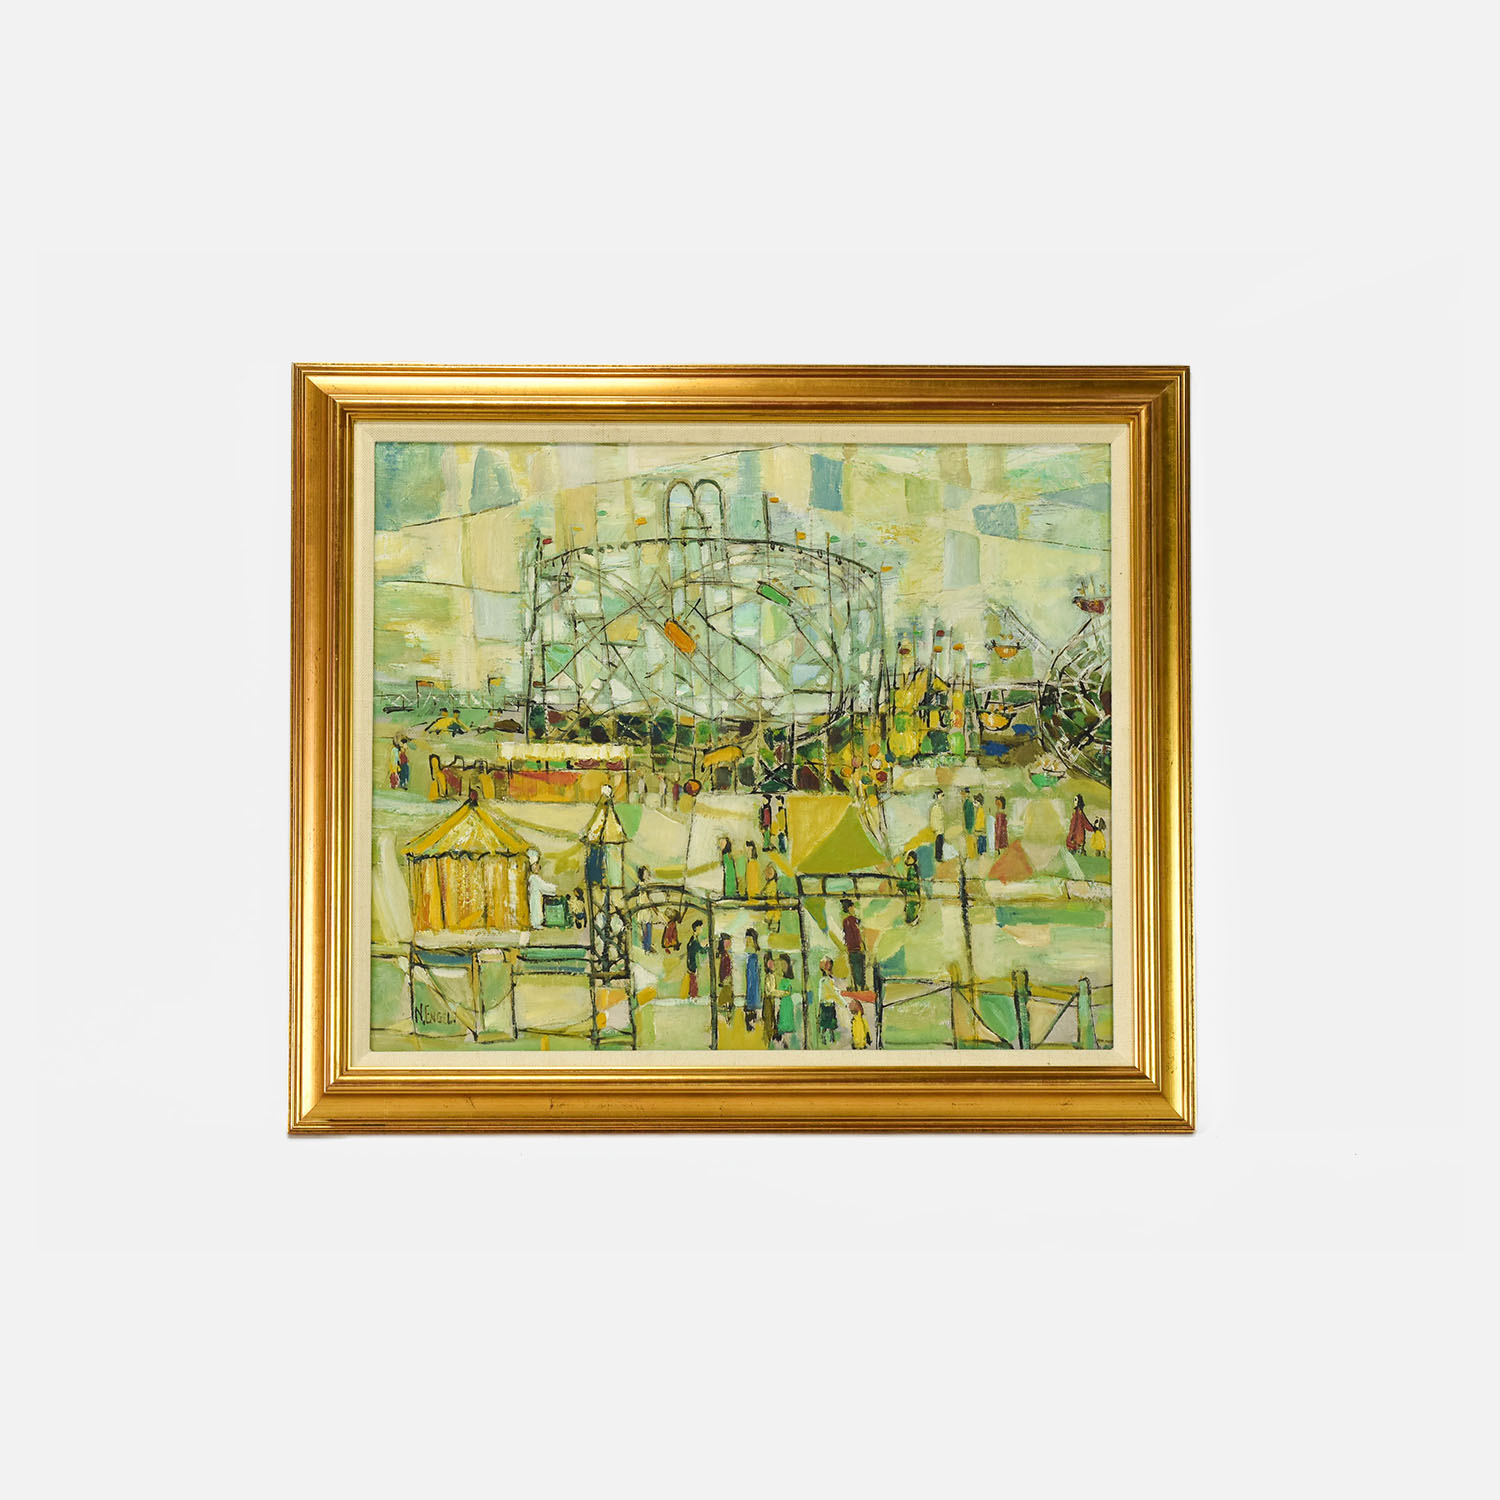 Oil on Canvas of Amusement Park Signed by Artist